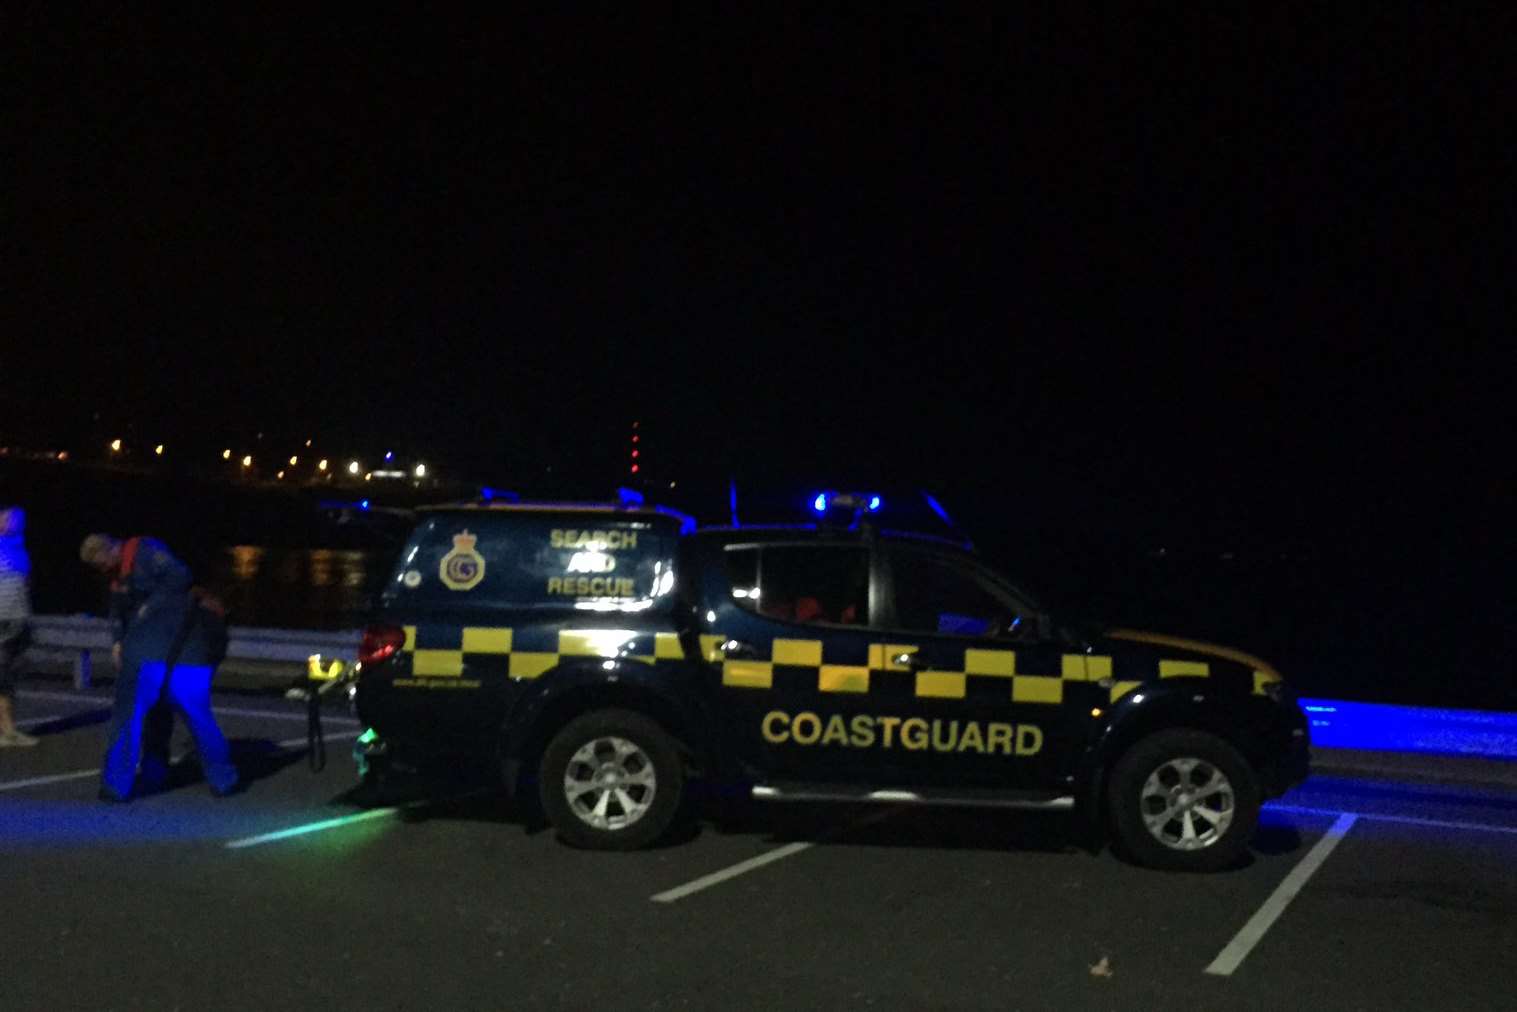 Coastguard crews were called after reports two people were seen in the water off Folkestone